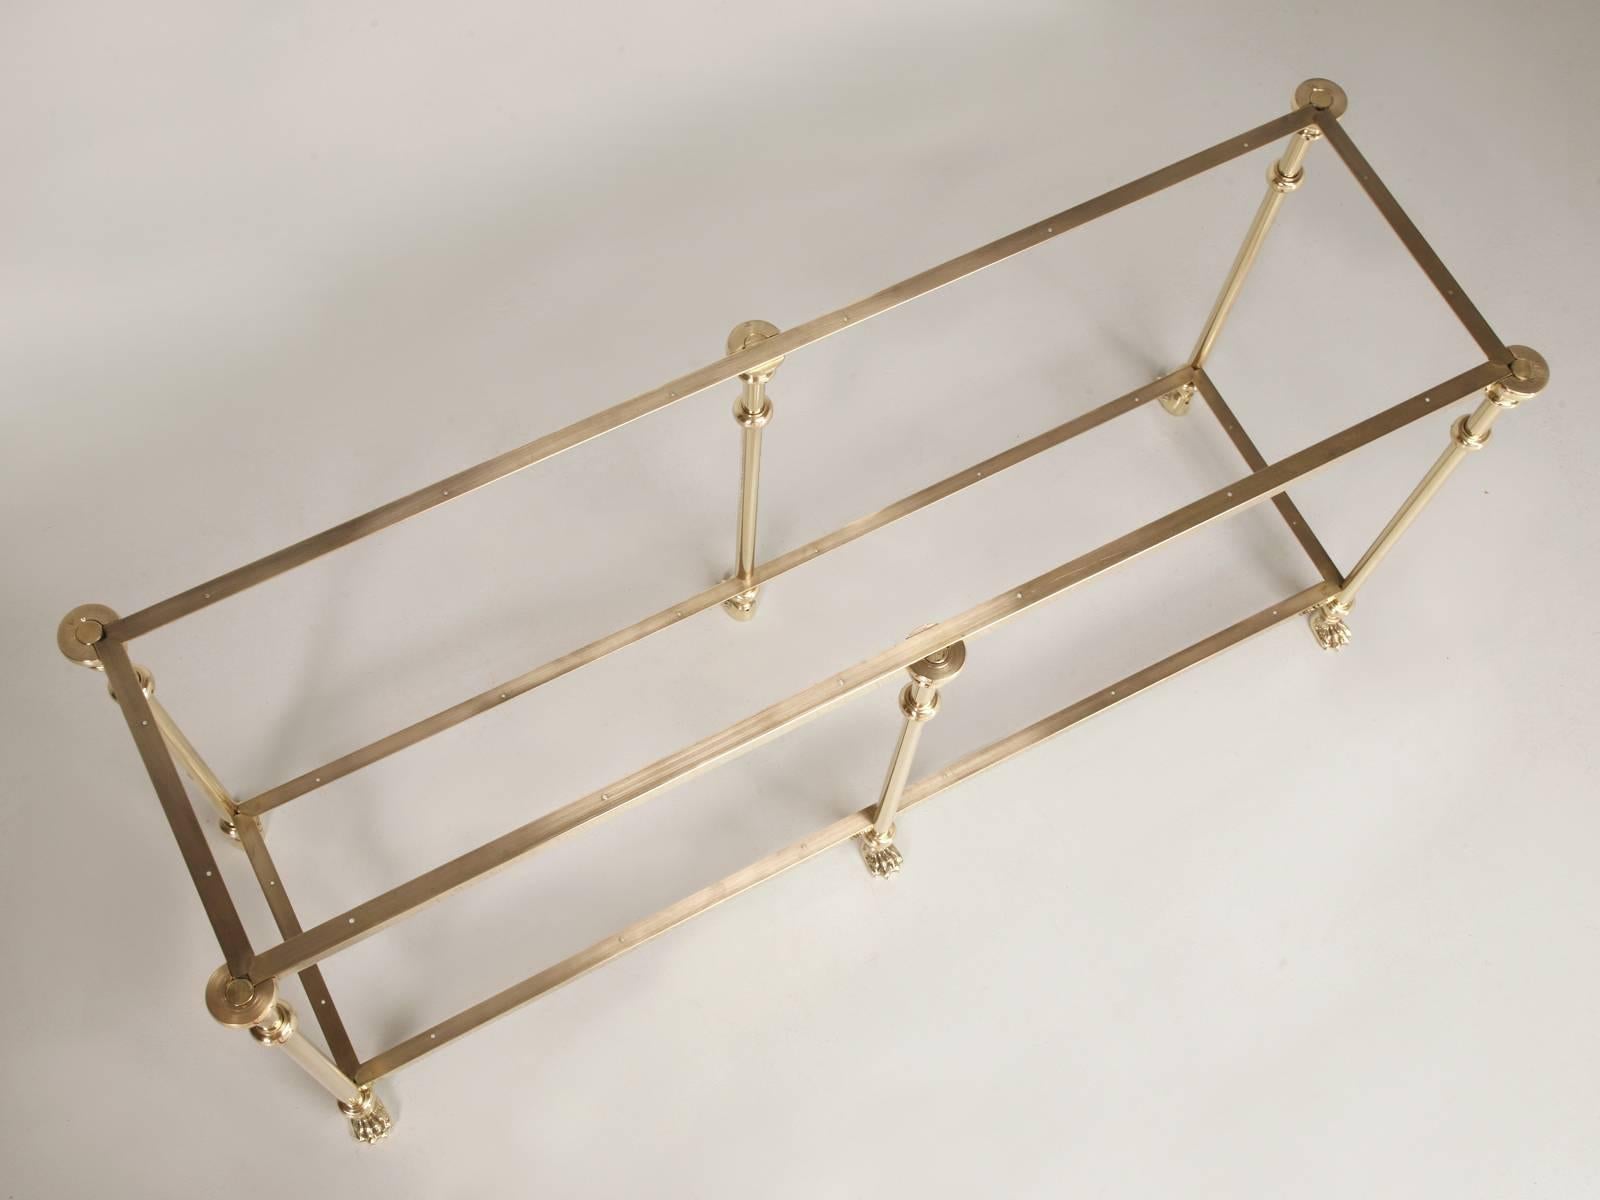 Custom Solid Hand-Polished Brass, two shelf Console Table, or could be resized into a Kitchen Island, with beautifully detailed Polished Brass Lion Paw Feet. Due to the fact that the Console shown here, was custom fabricated by our own metal